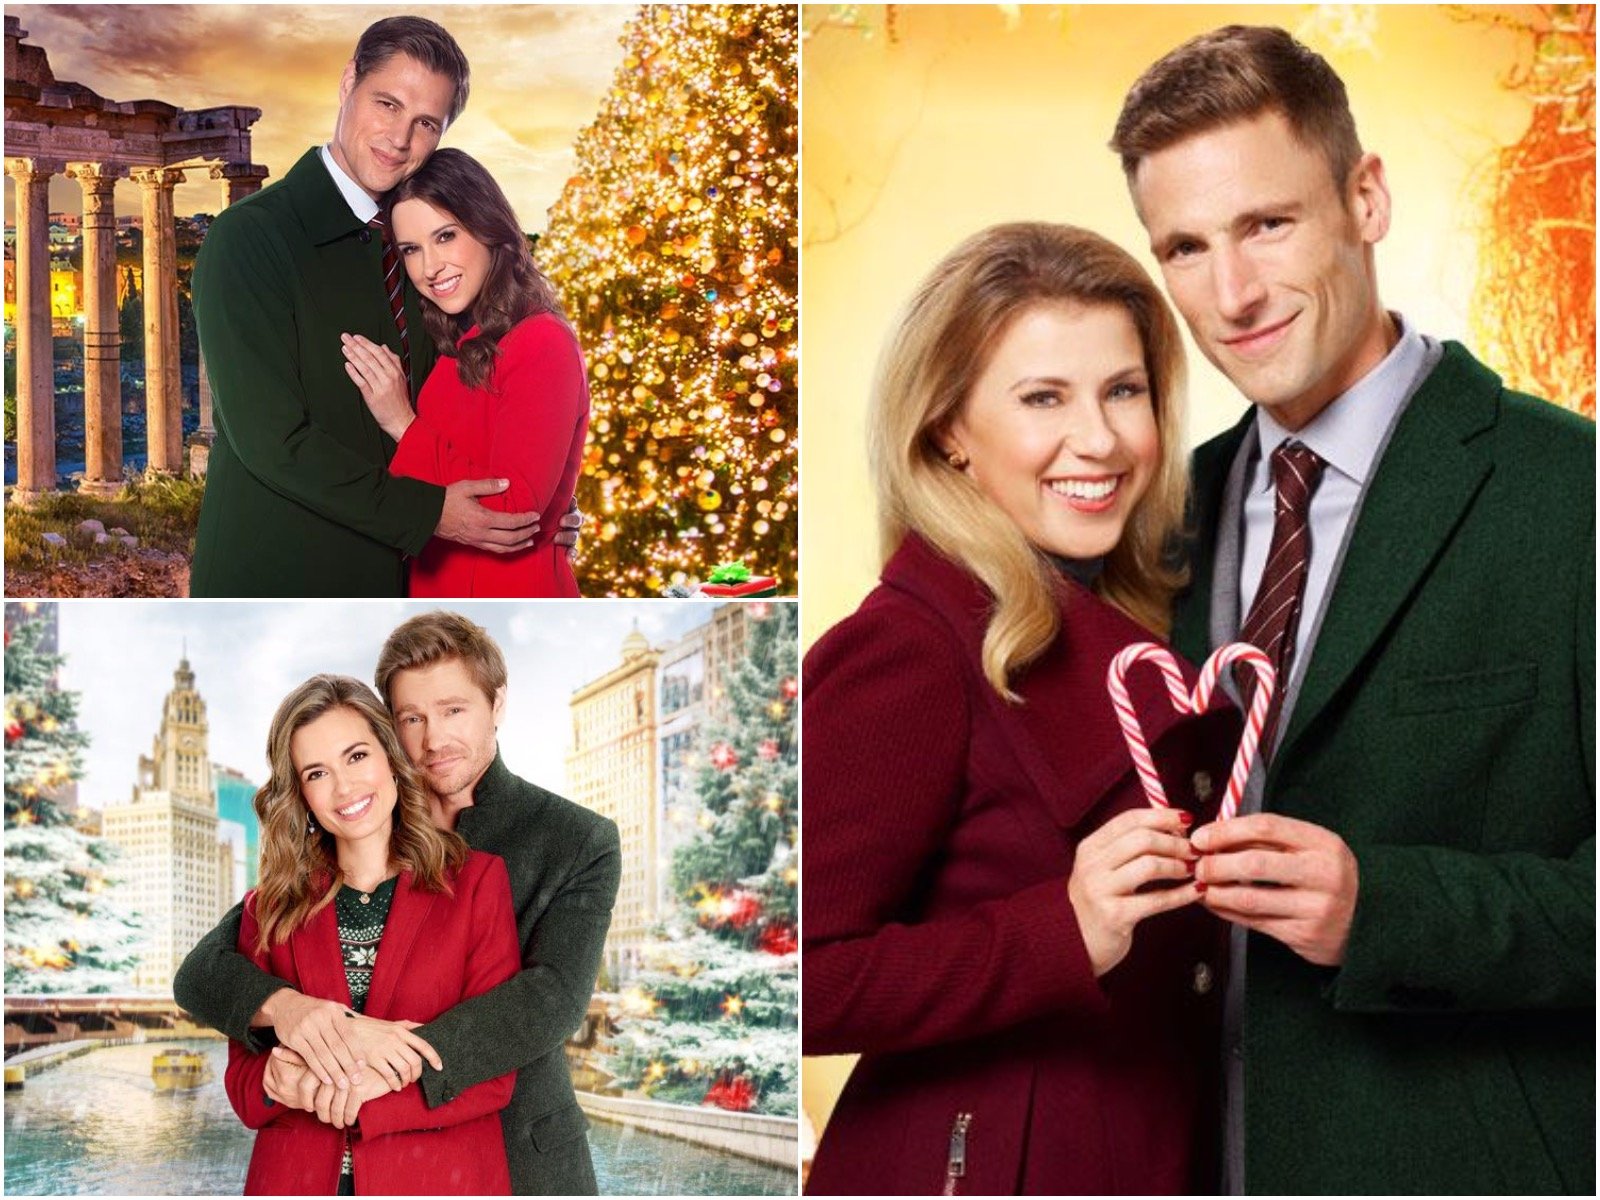 Tis the season A guide to the Hallmark Channel's new Christmas movies